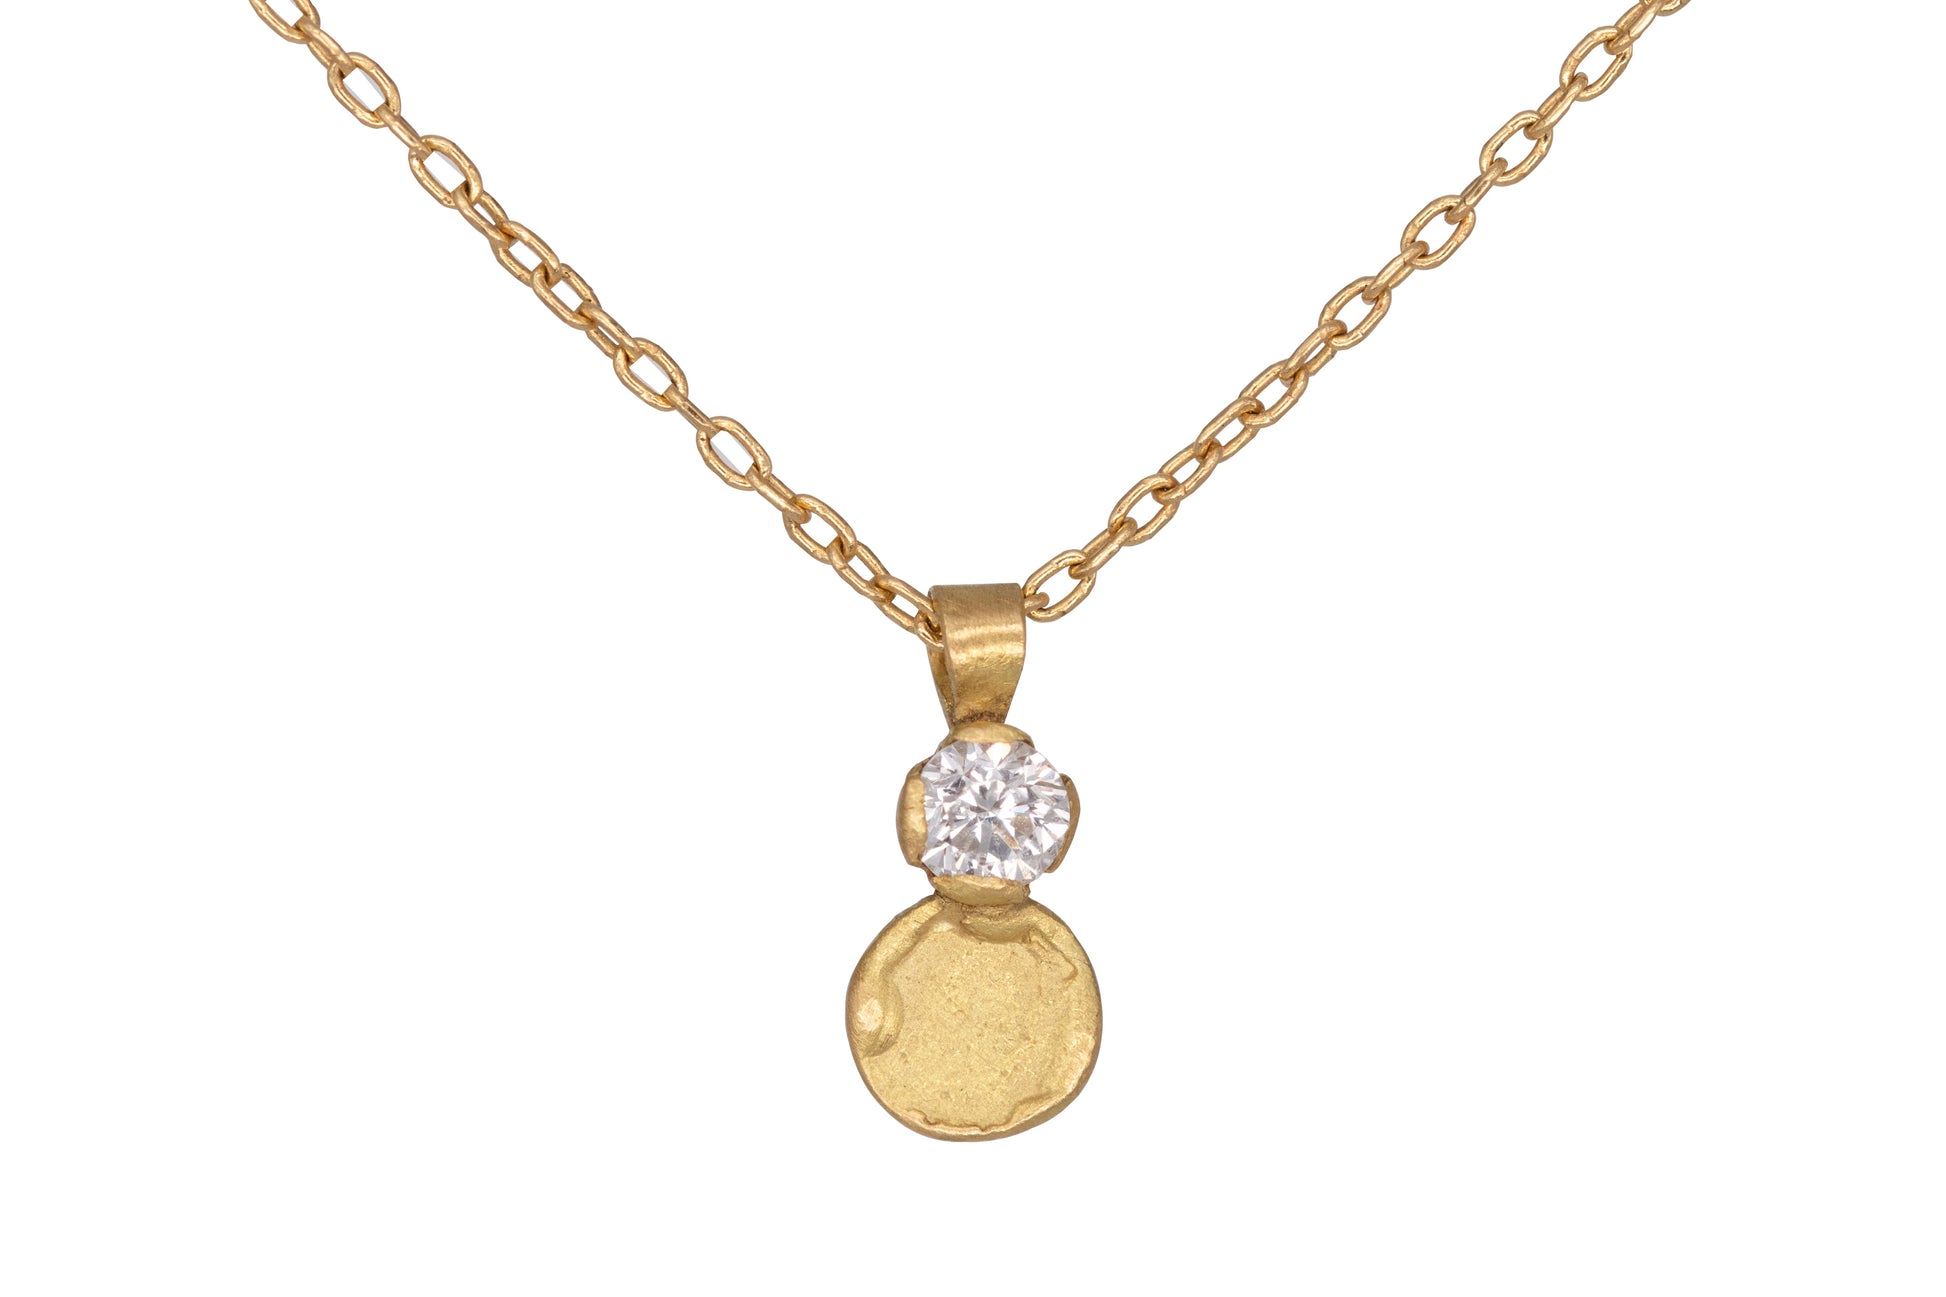 handmade 18ct gold disc pendant necklace with diamond